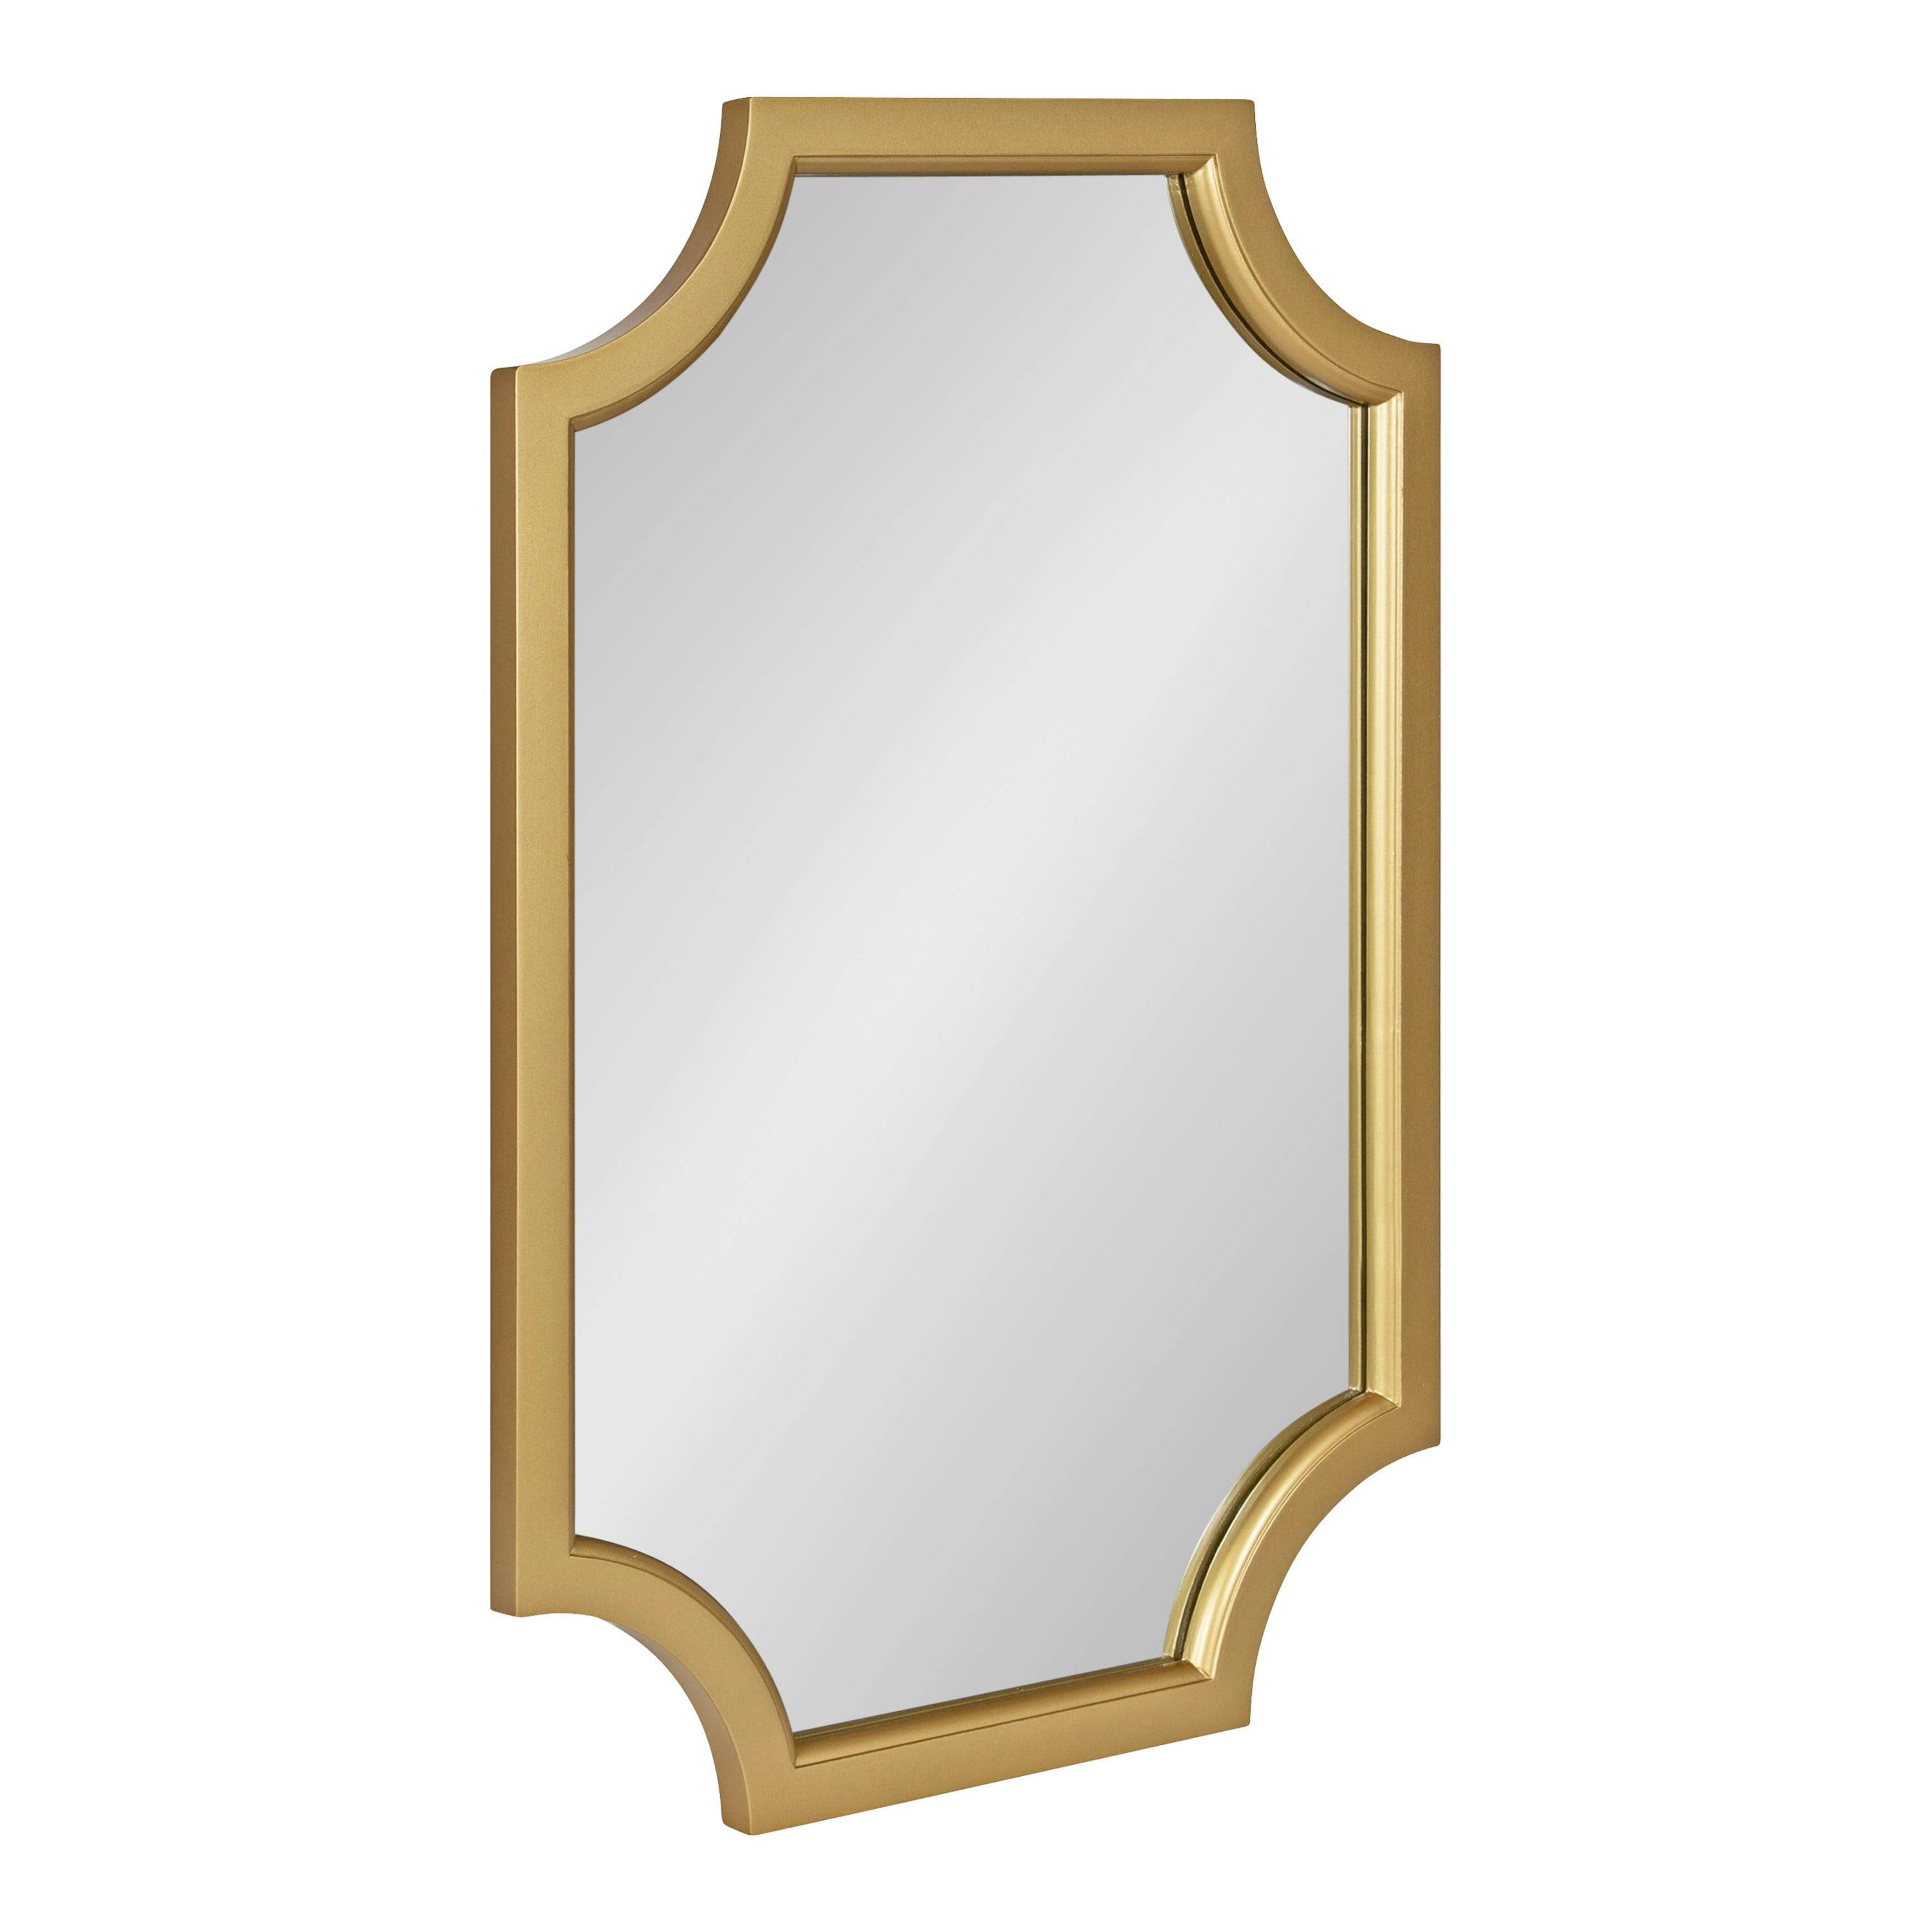 Scalloped Edge 23x33 Gold Finish Wooden Wall Mirror